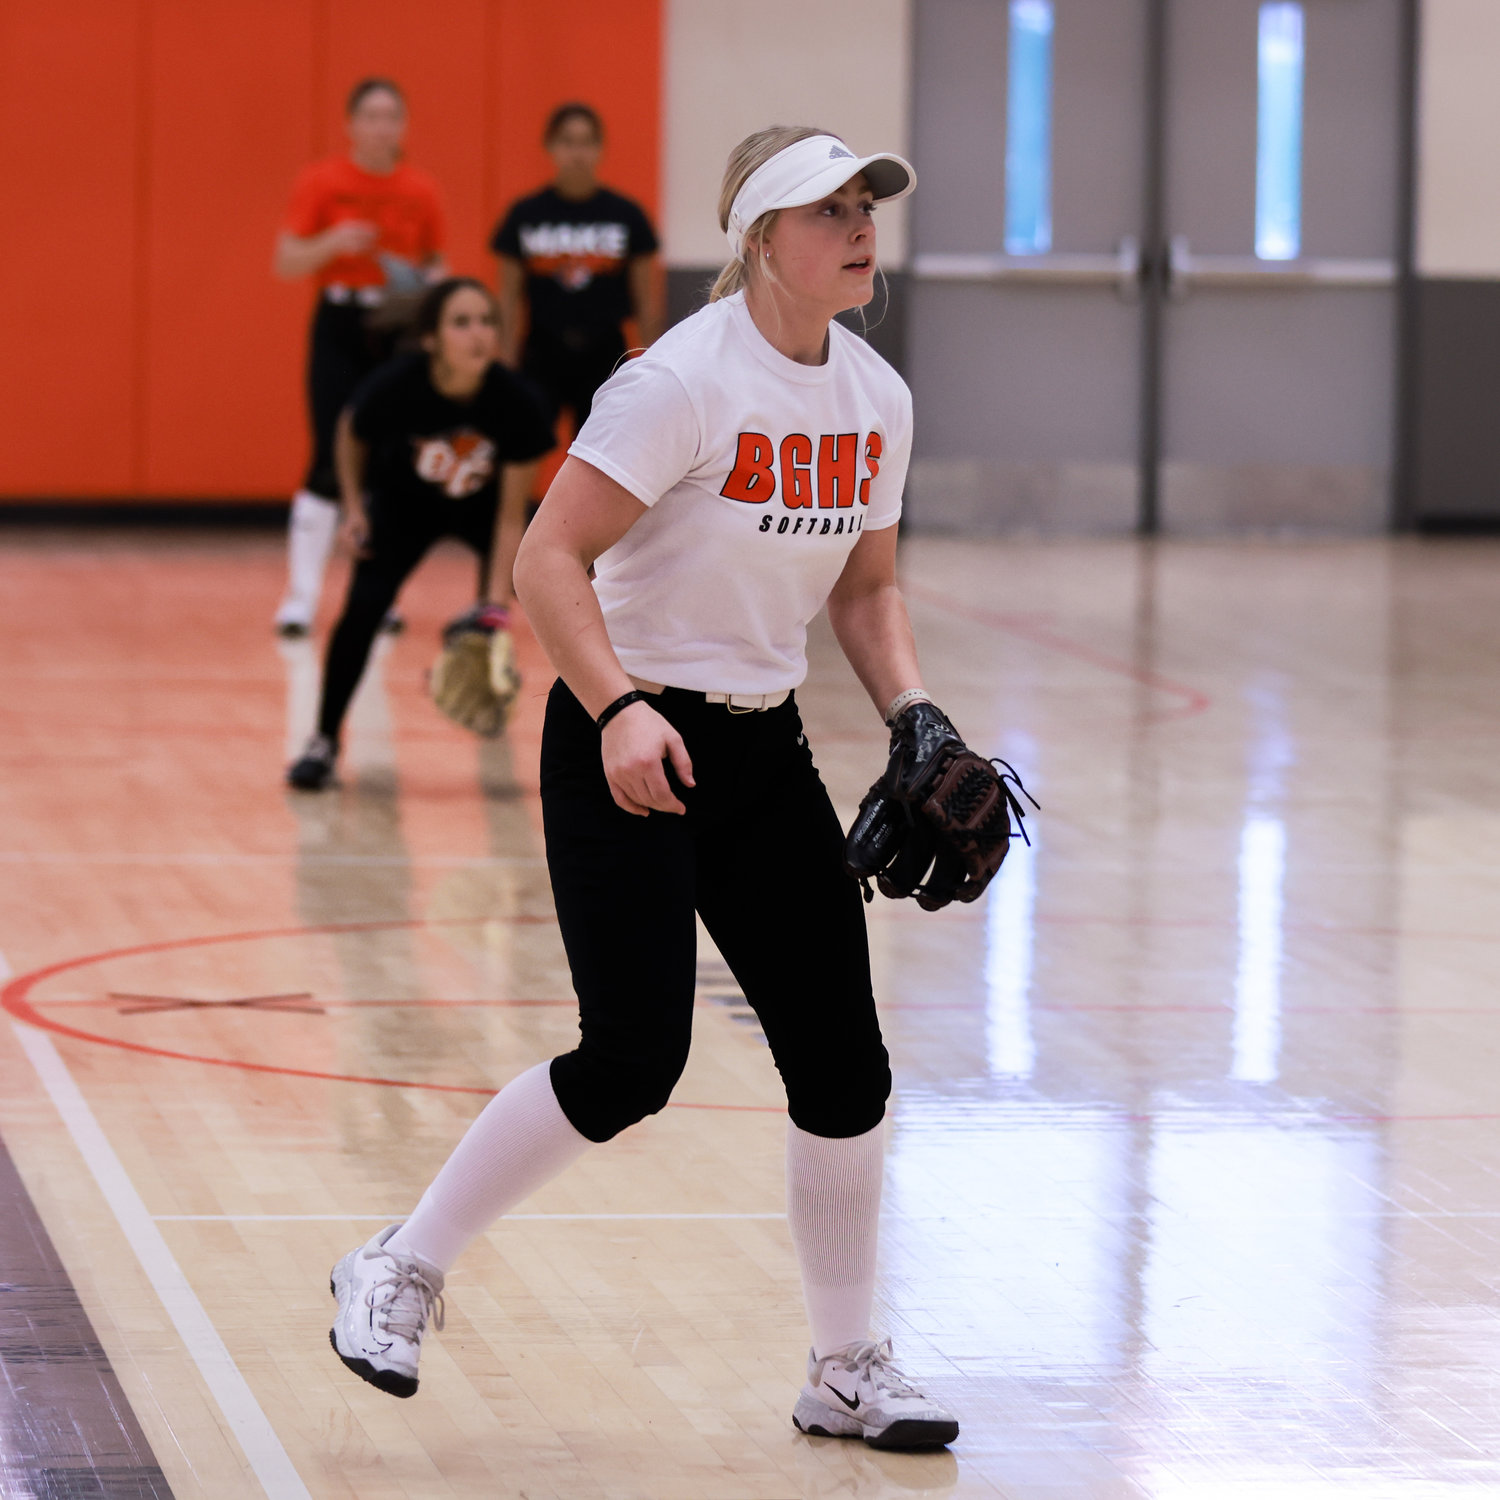 University of Montana commit, senior pitcher, Rylee Rehbein during indoor defense drills at Battle Ground High School due to field conditions on Tuesday, March 7.